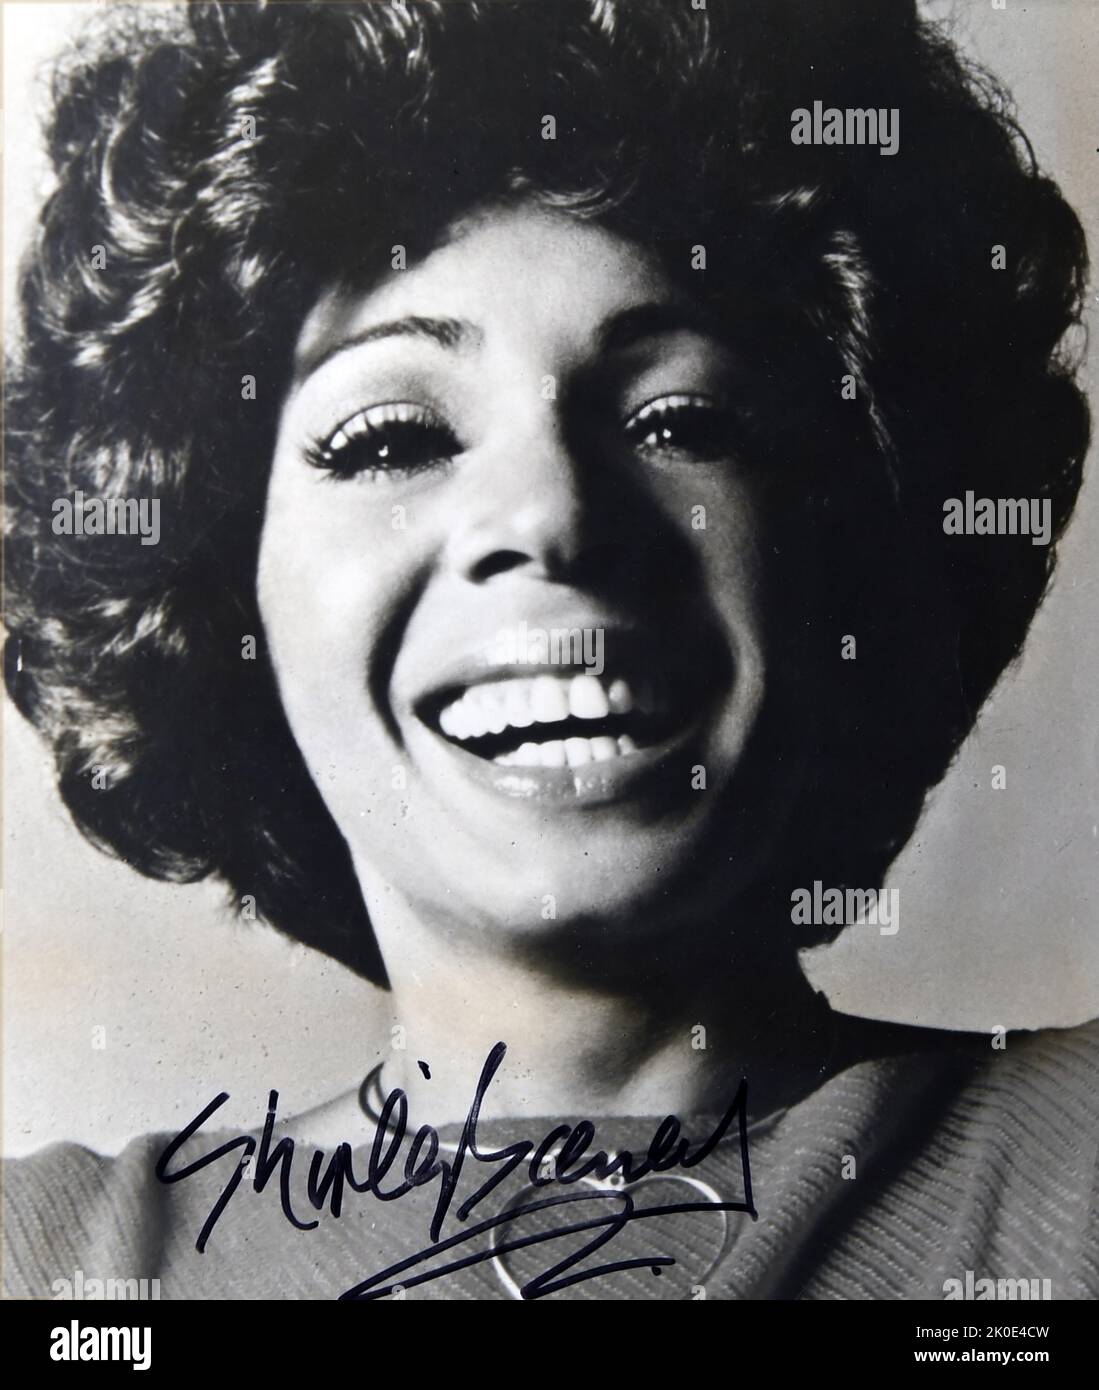 Dame Shirley Veronica Bassey, (born 1937) Welsh singer. Well-known for her expressive voice and for recording the soundtrack theme songs of the James Bond films Goldfinger (1964), Diamonds Are Forever (1971), and Moonraker (1979) signed photograph 1980. Stock Photo